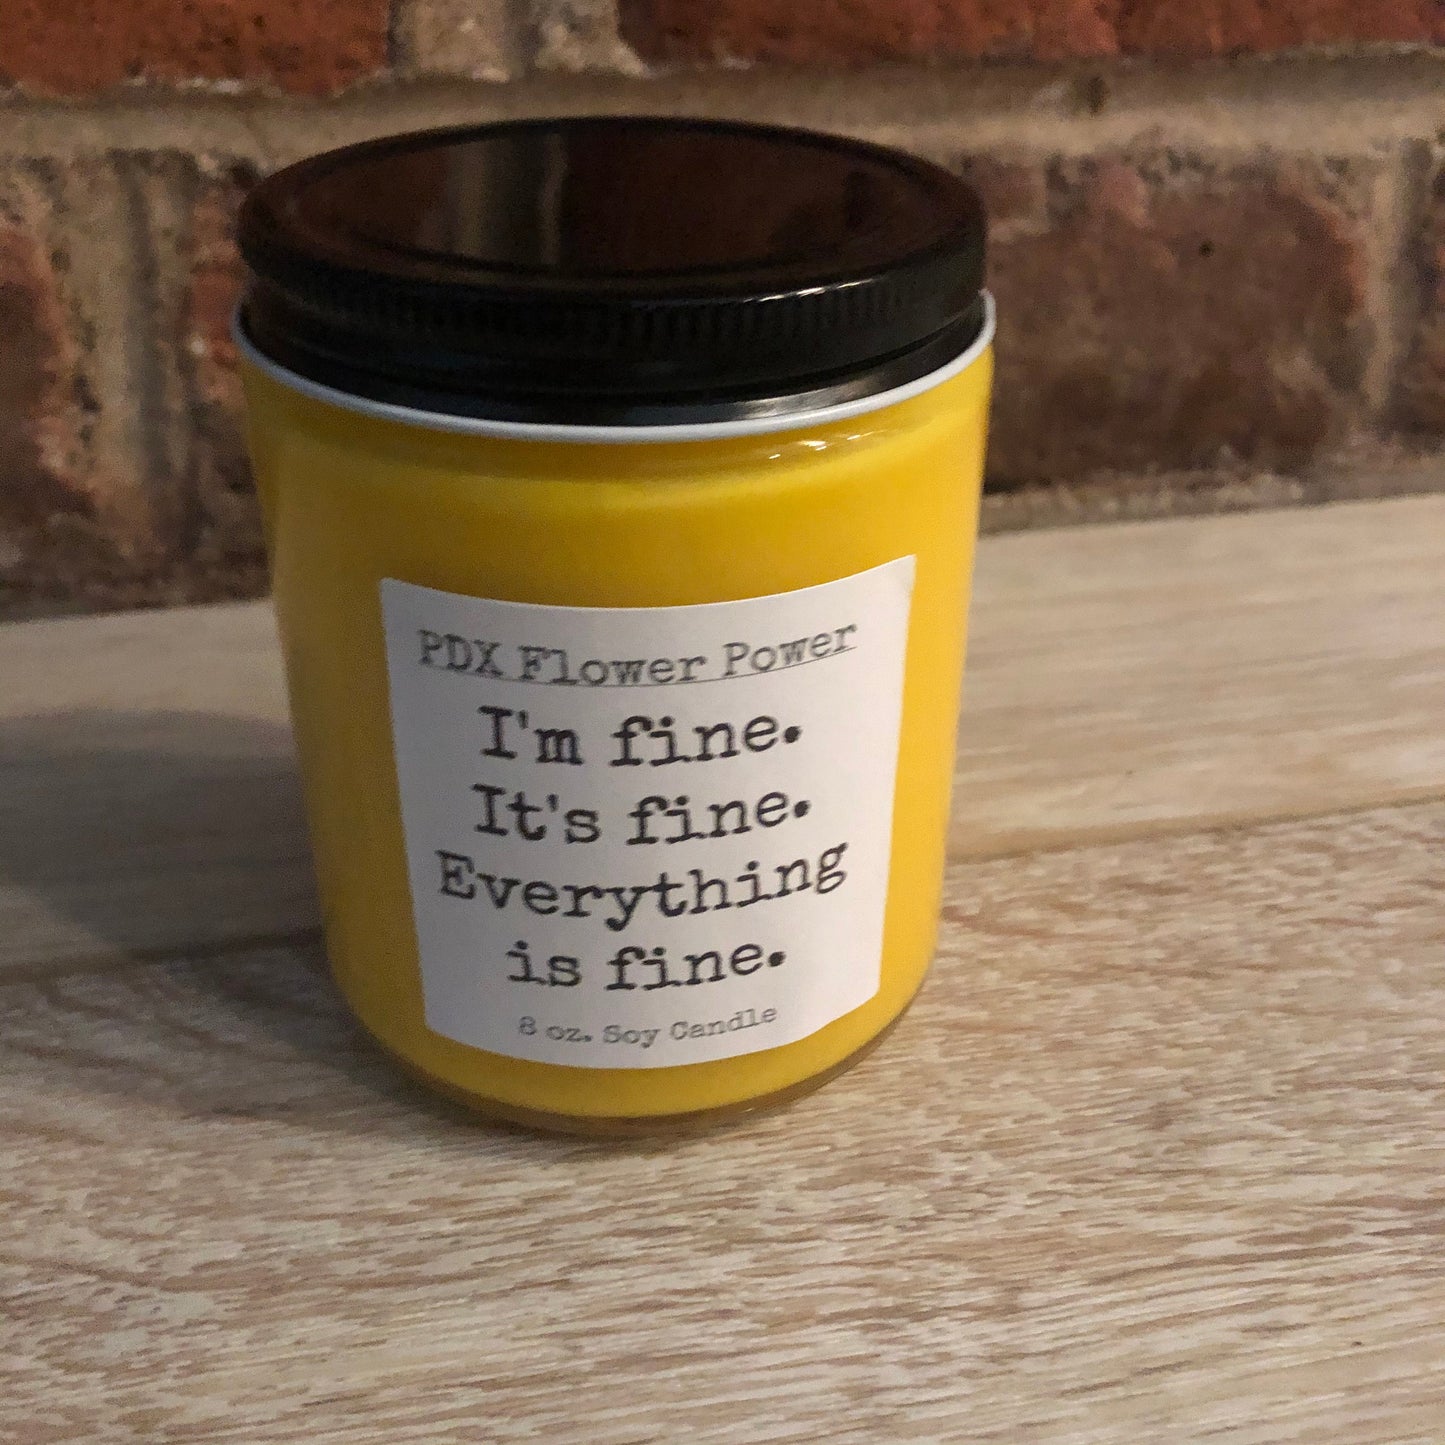 PDX Flower Power " I'm fine, it's fine, everything is fine!" handcrafted soy candle